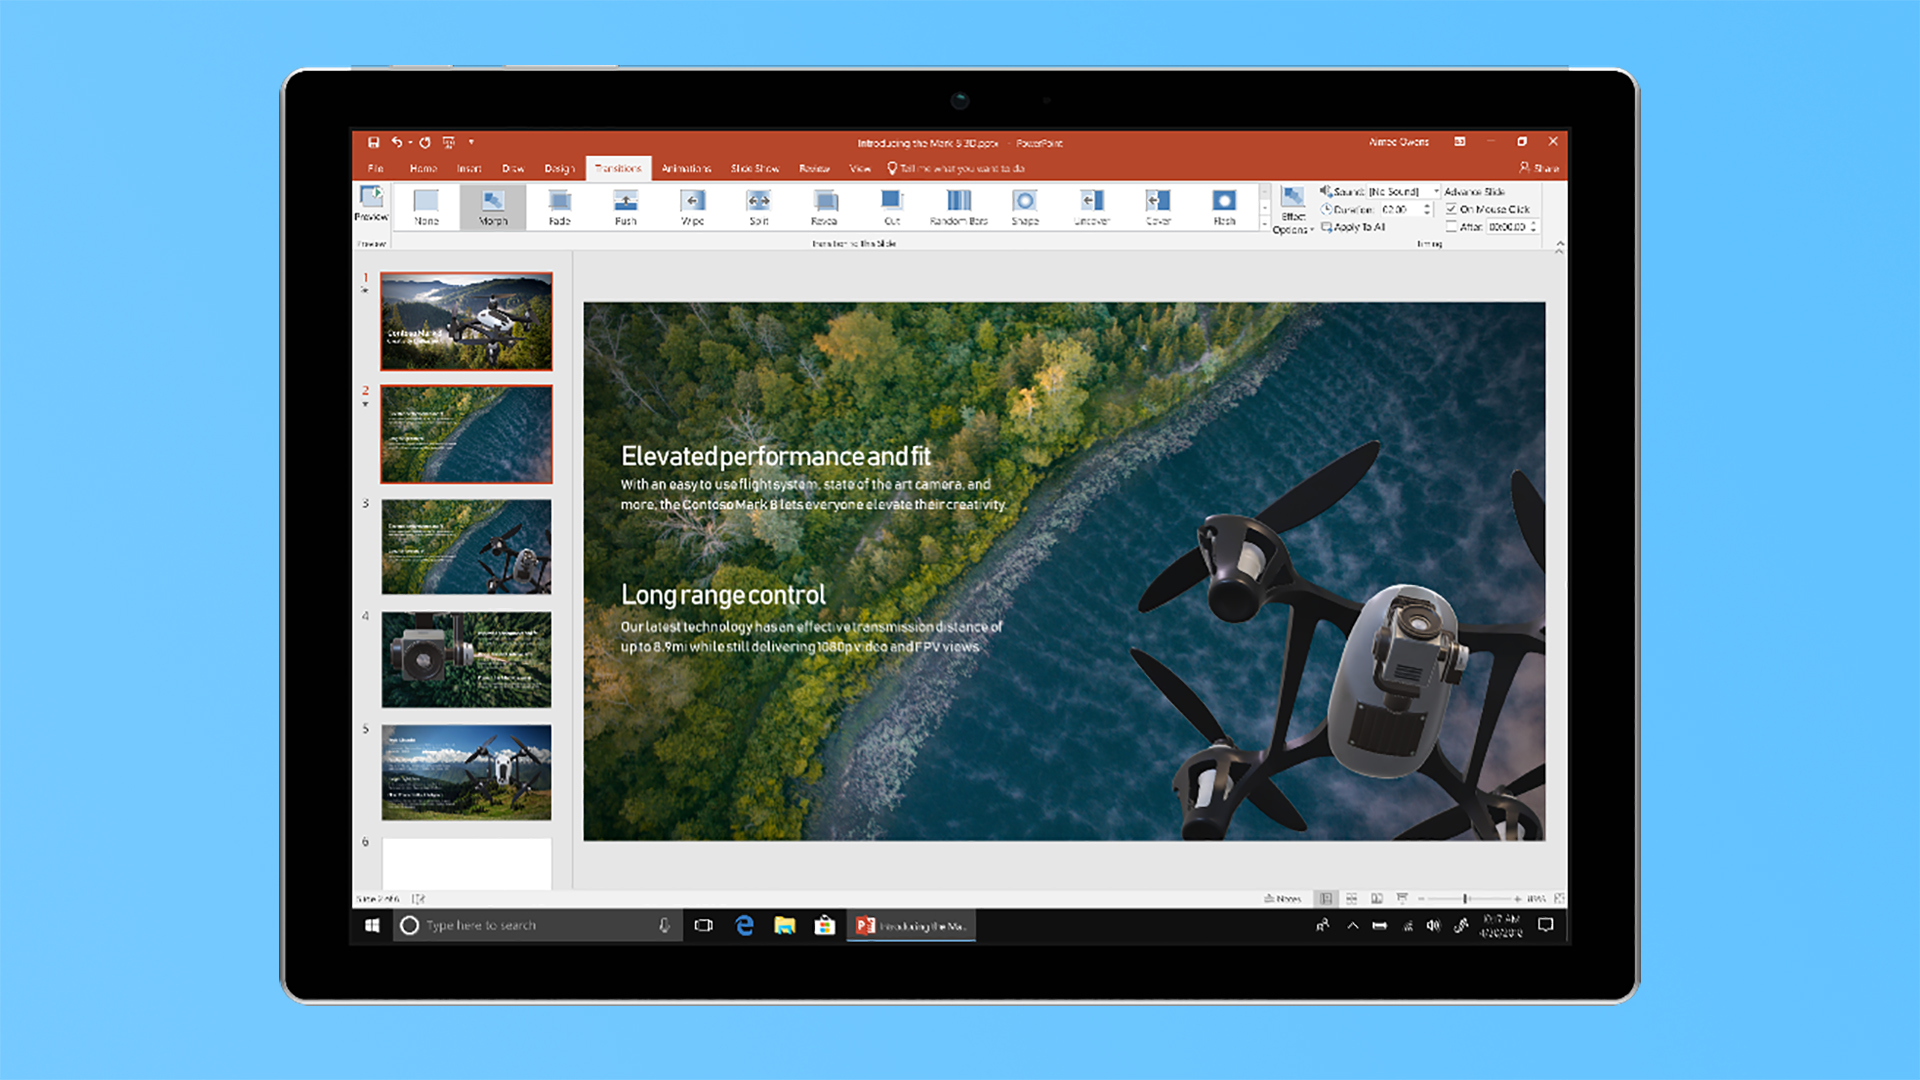 find product key for microsoft office 365 for mac